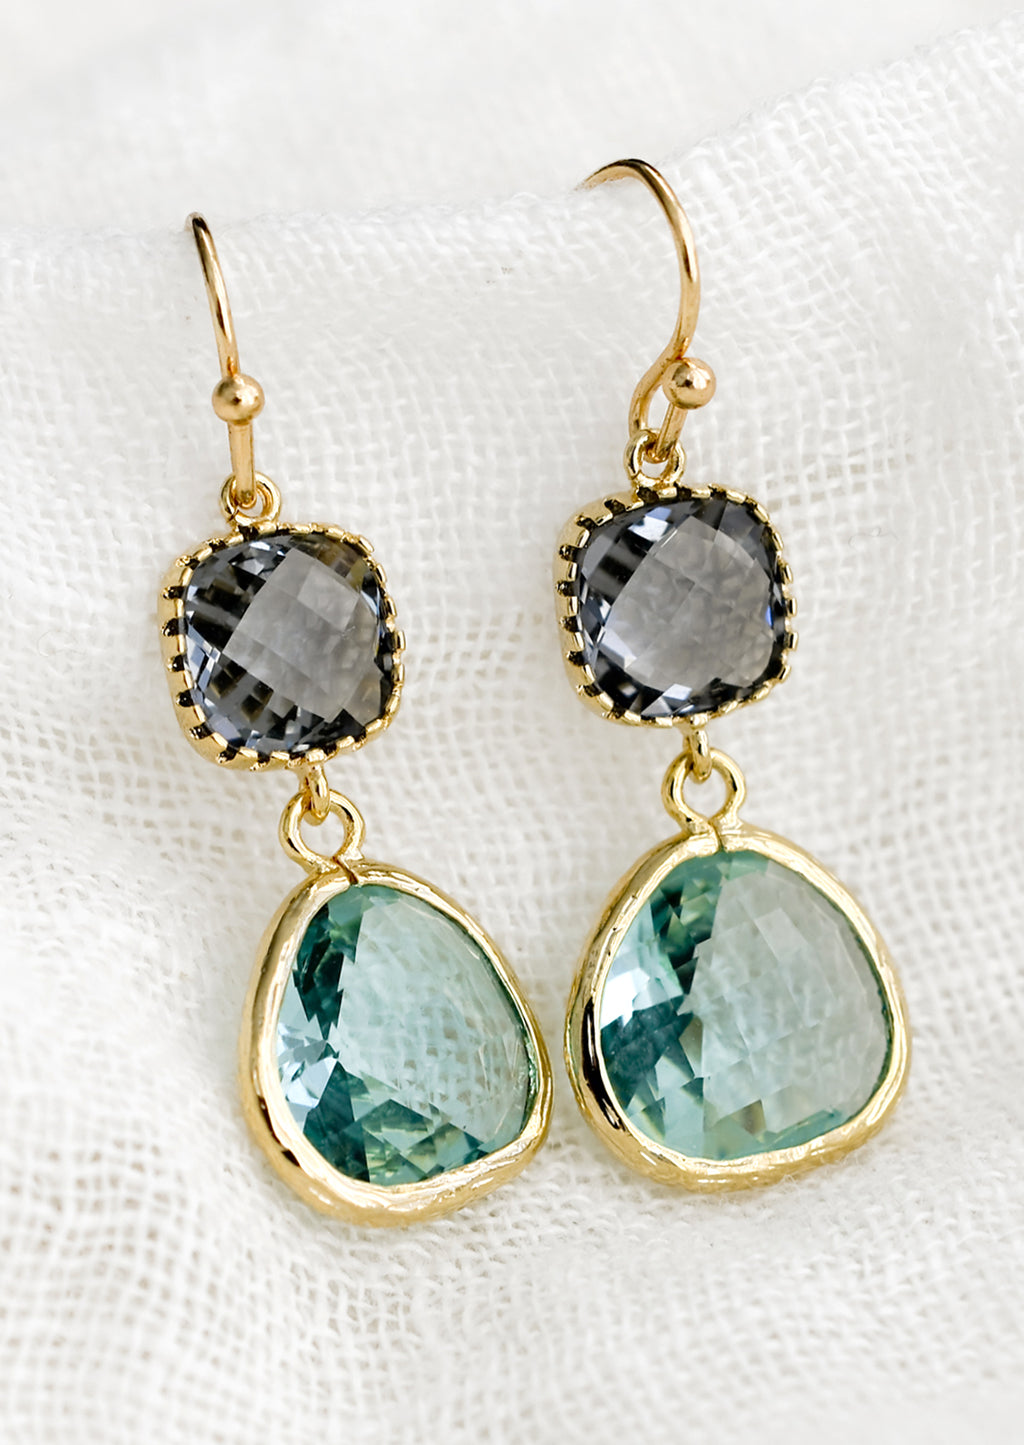 Grey / Prasiolite: A pair of two-stone bezeled gem earrings in grey and aqua.